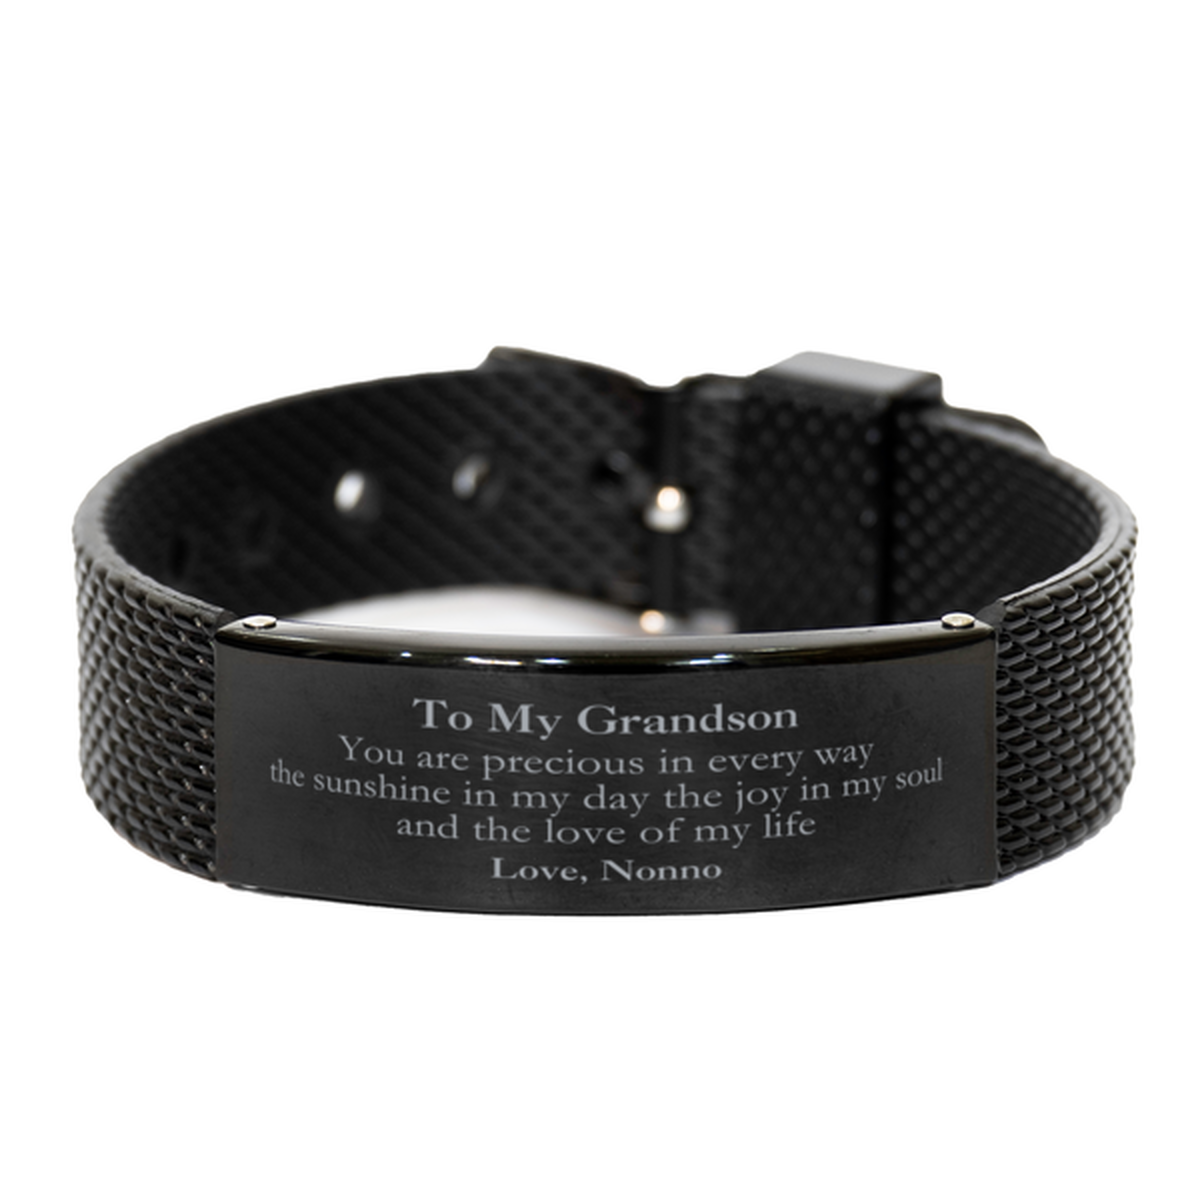 Graduation Gifts for Grandson Black Shark Mesh Bracelet Present from Nonno, Christmas Grandson Birthday Gifts Grandson You are precious in every way the sunshine in my day. Love, Nonno